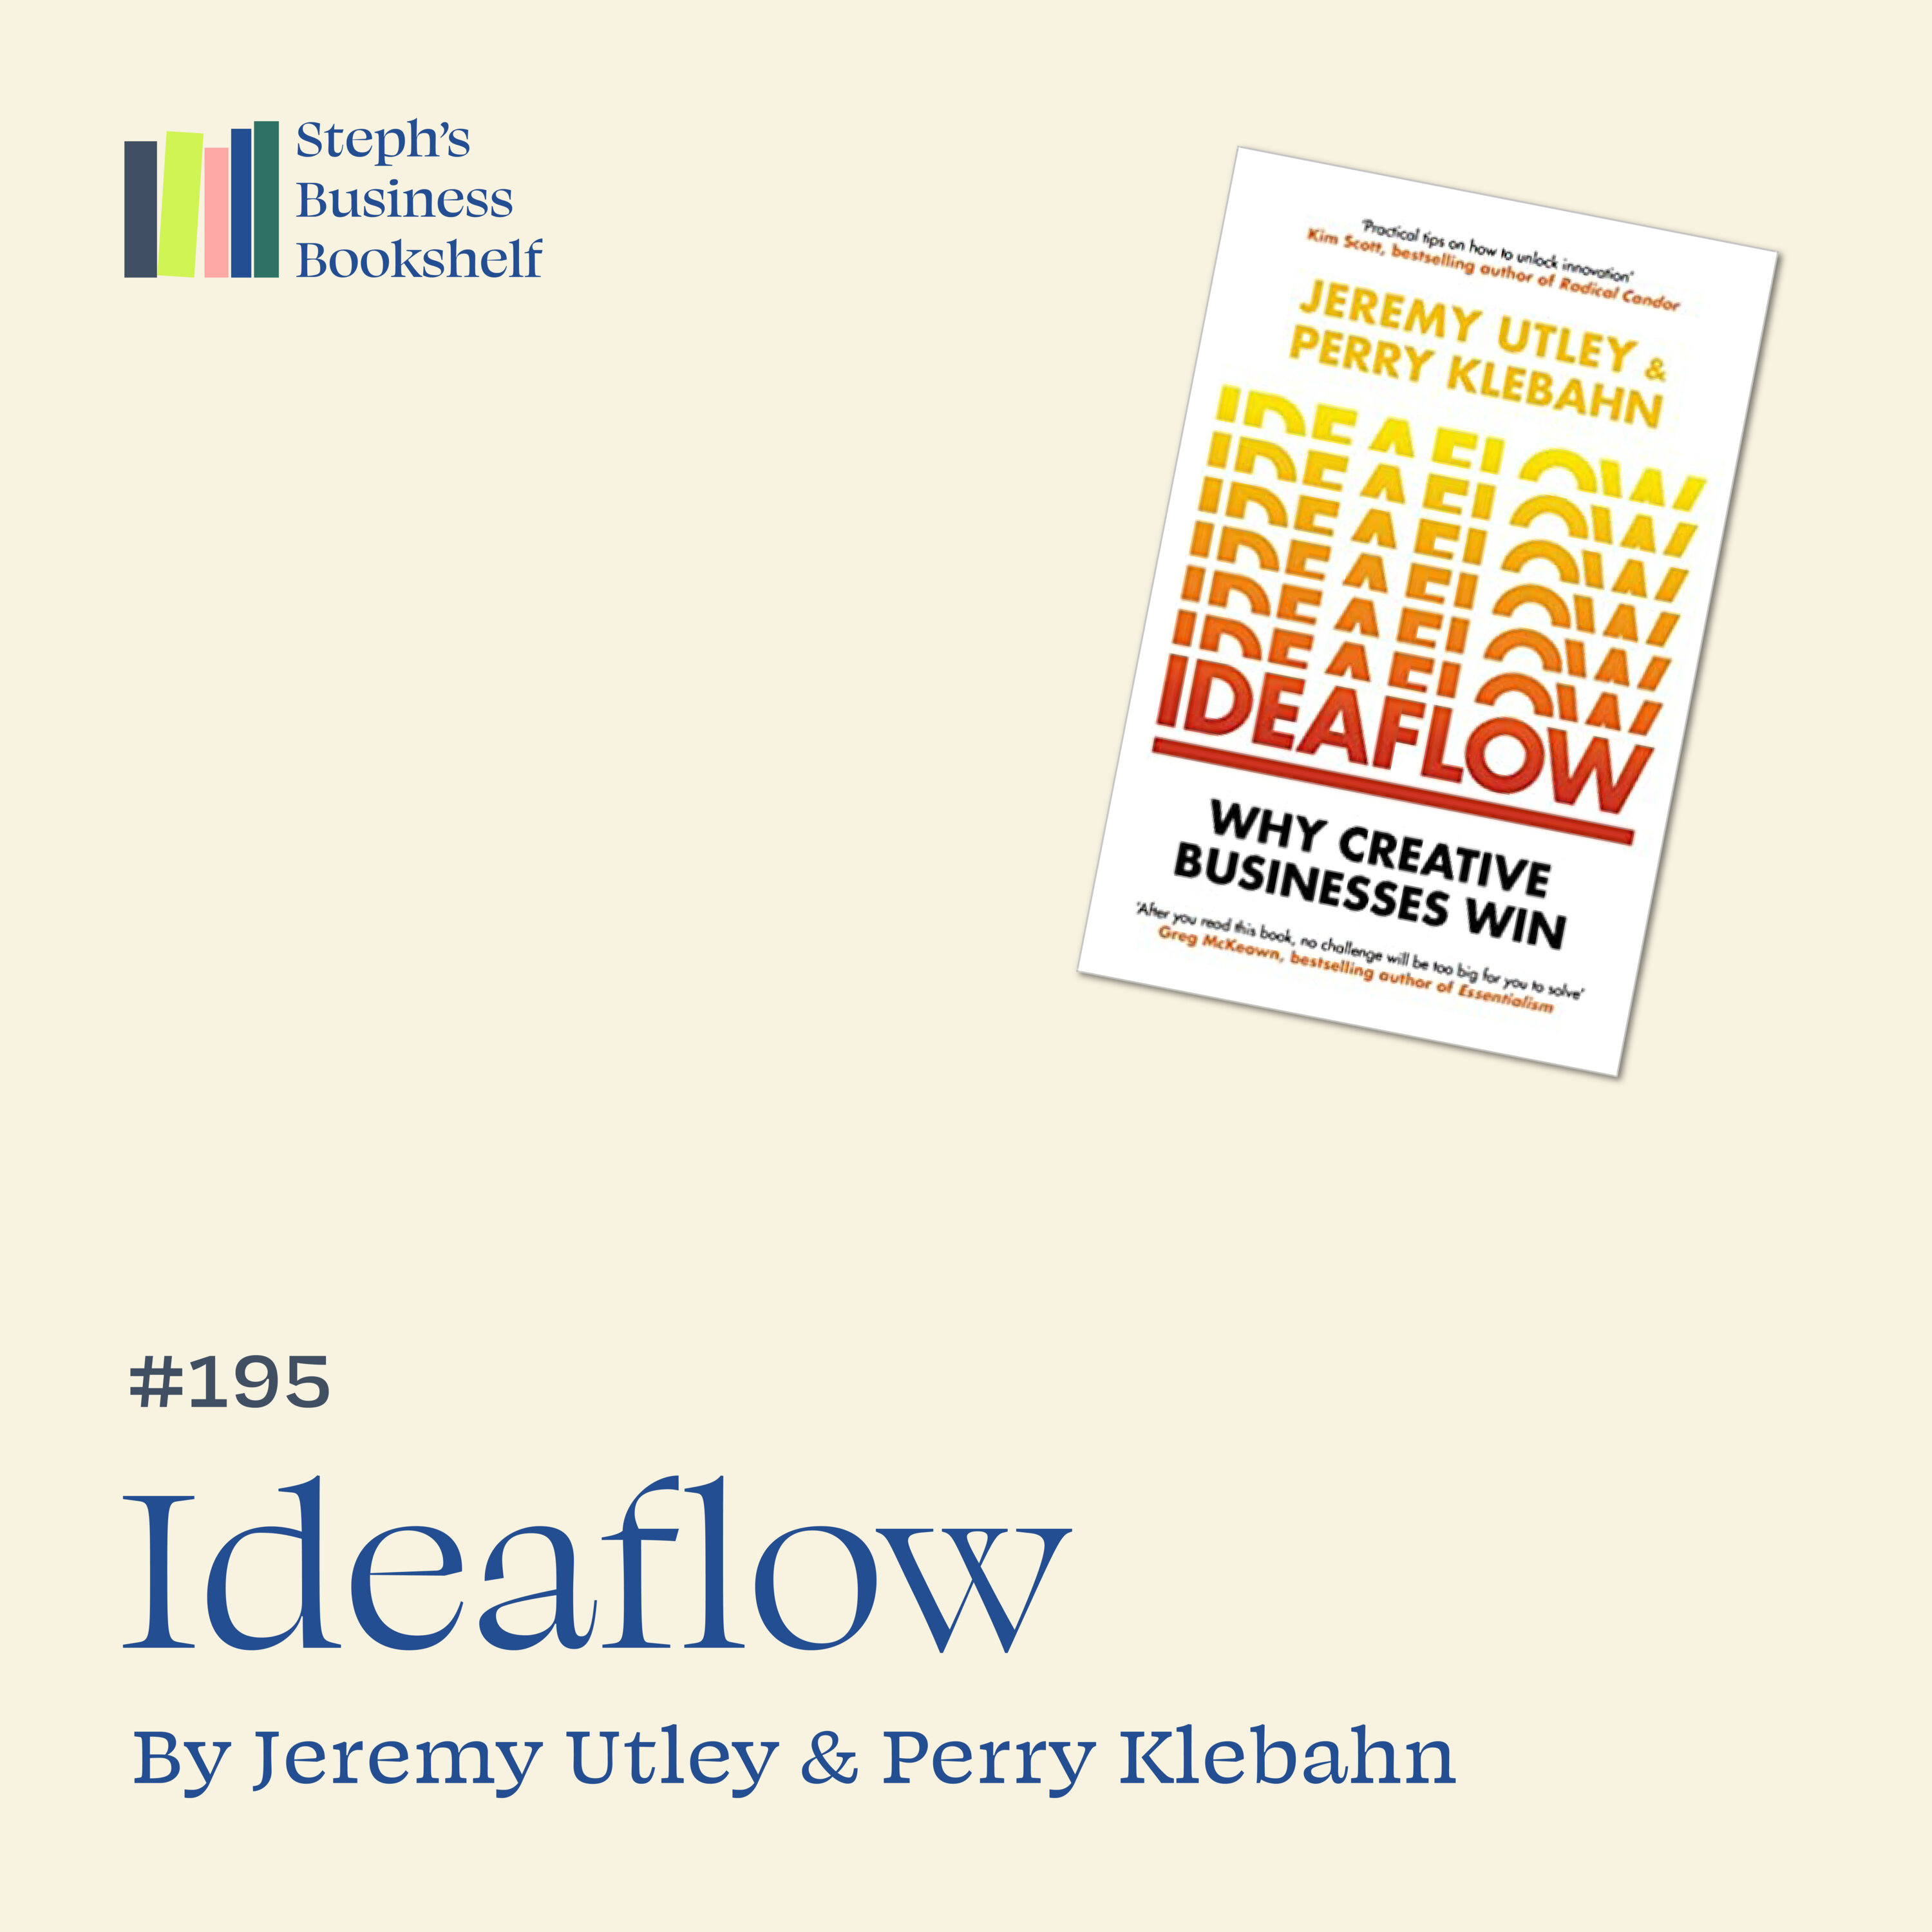 Ideaflow by Jeremy Utley and Perry Klebahn: how to have more ideas